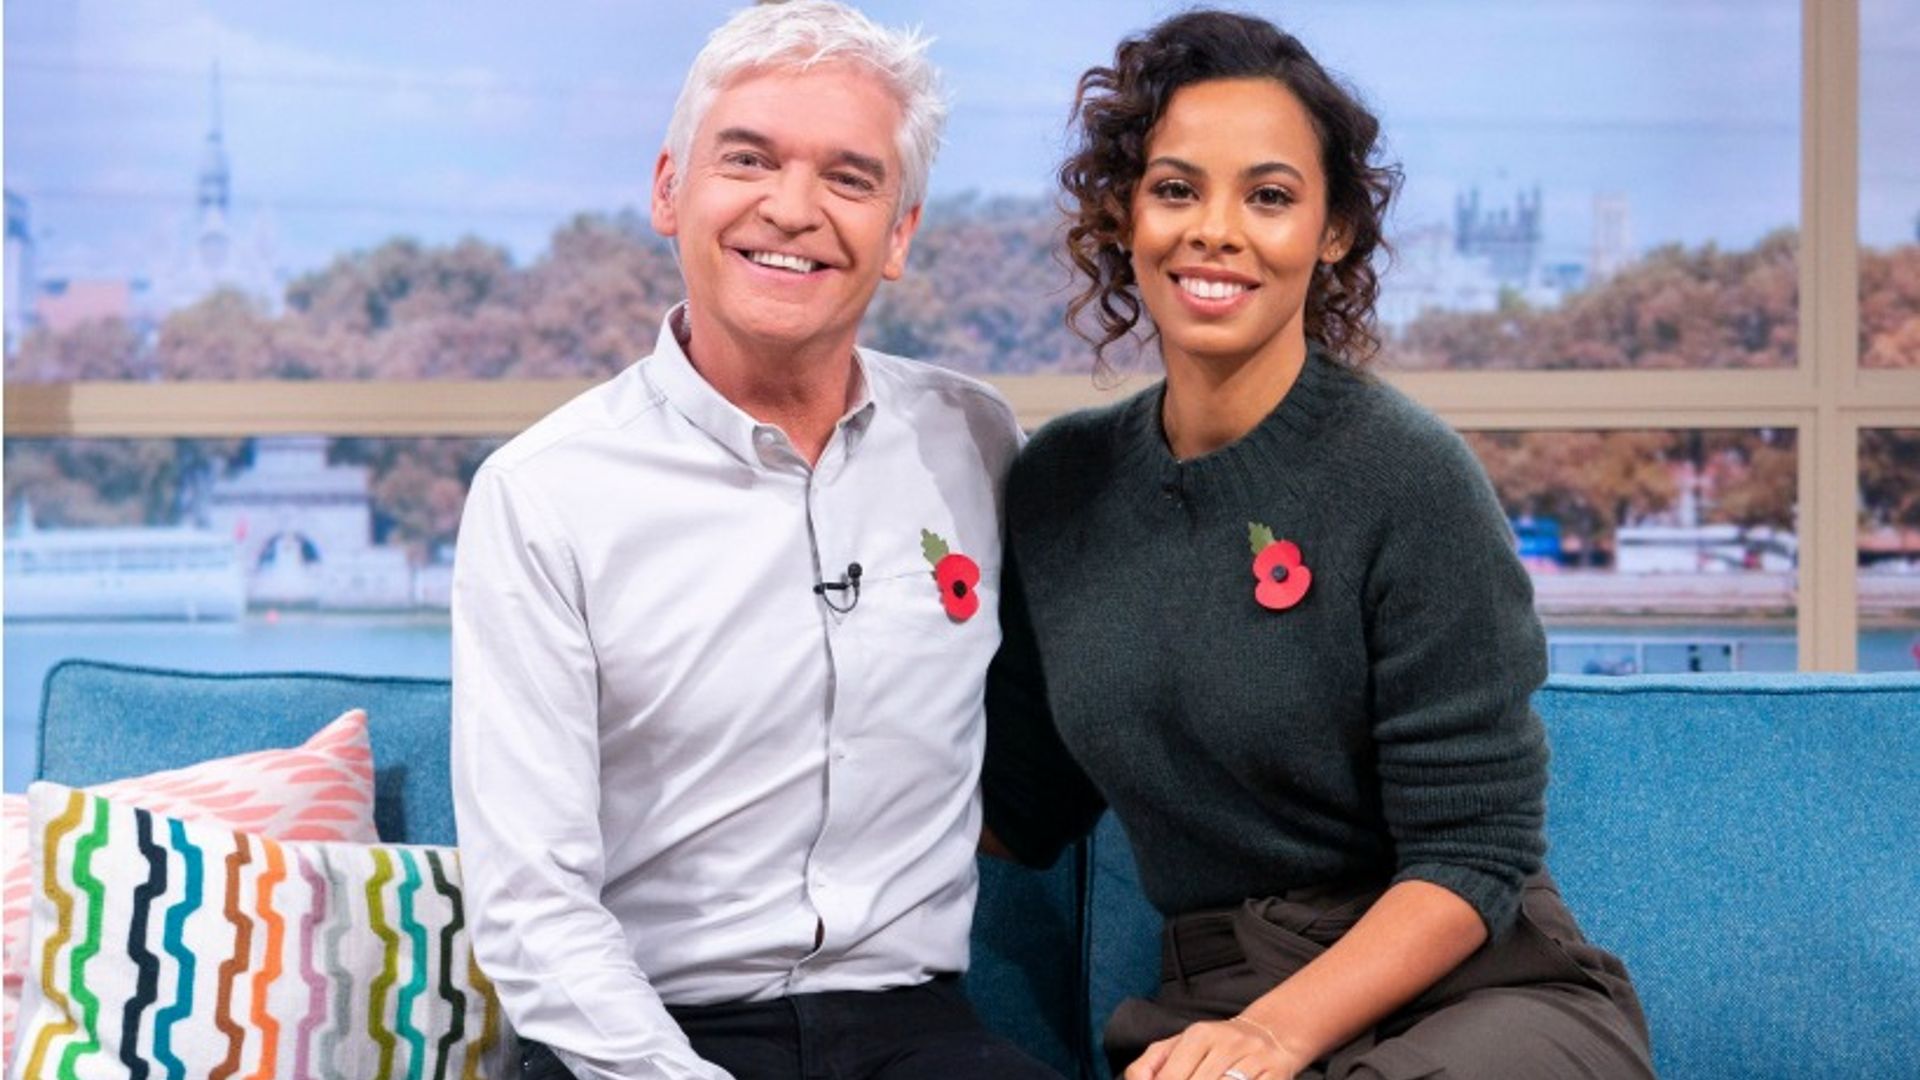 Rochelle Humes surprises on This Morning wearing an outfit Holly Willoughby never would